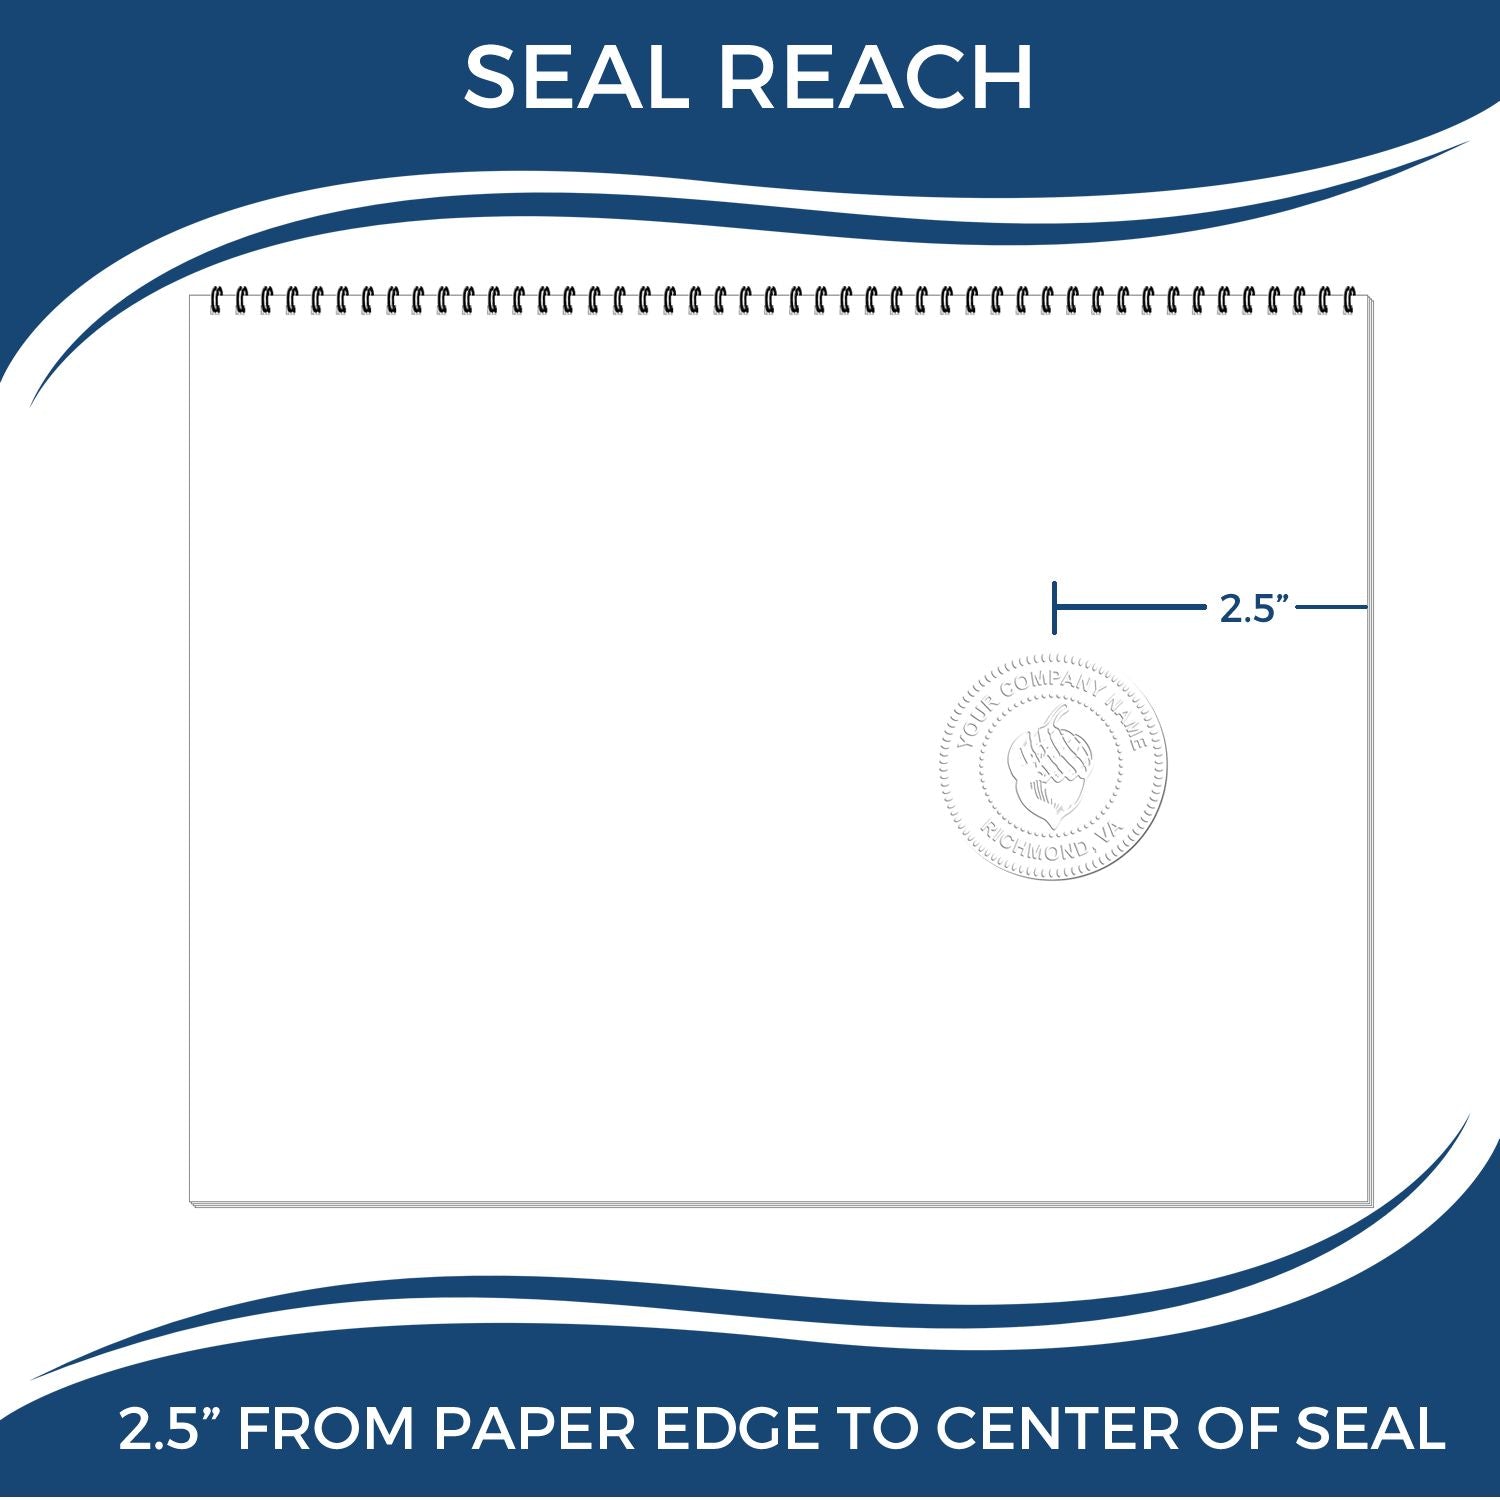 An infographic showing the seal reach which is represented by a ruler and a miniature seal image of the Long Reach Oklahoma Geology Seal